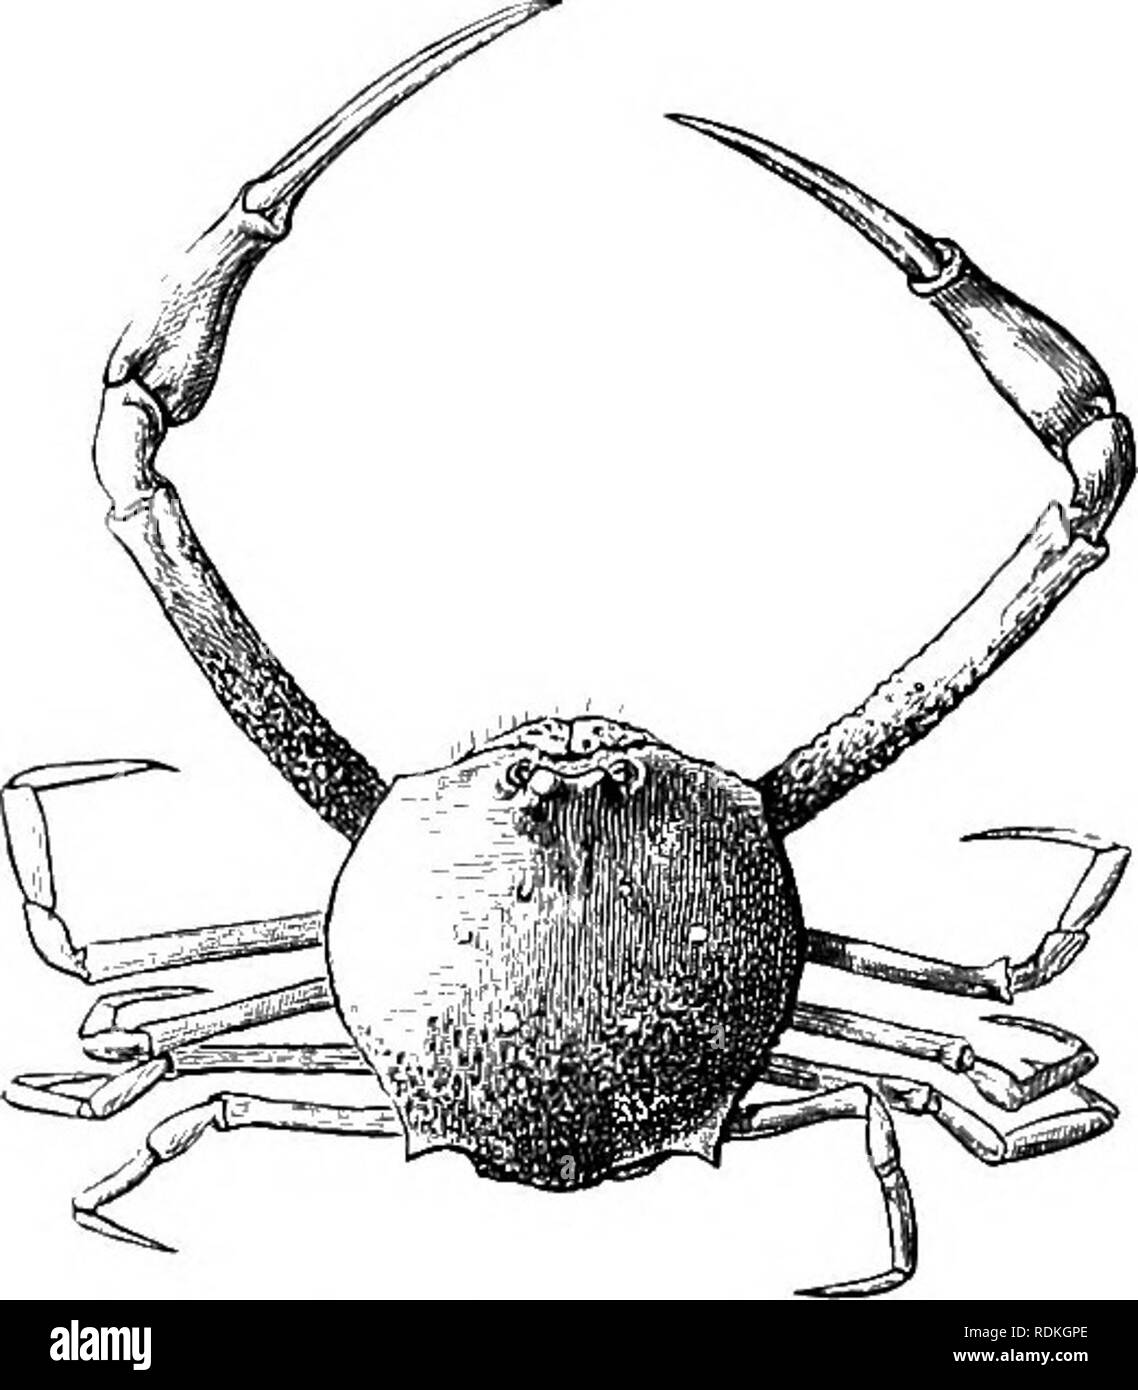 . The Cambridge natural history. Zoology. i88 CRUSTACEA EUCARIDA DECAPODA tropical, and extending into the warmer temperate seas. Matuta (Fig. 129) from the Indo-Pacific. Fam. 2. Leucosiidae.—Similar to the above, but the afferent openings to the gill-chambers lie at the bases of the third niaxilli- pedes. Male openings on the sternum. This family contains a great number of forms, with head - quarters in the tropical littoral, but extending into the temperate seas. Ilia in the European seas. /. nucleus (Fig- 130) common in the Mediter- ranean. Ebalia in the Atlantic, North Sea, and Indo - Paci Stock Photo